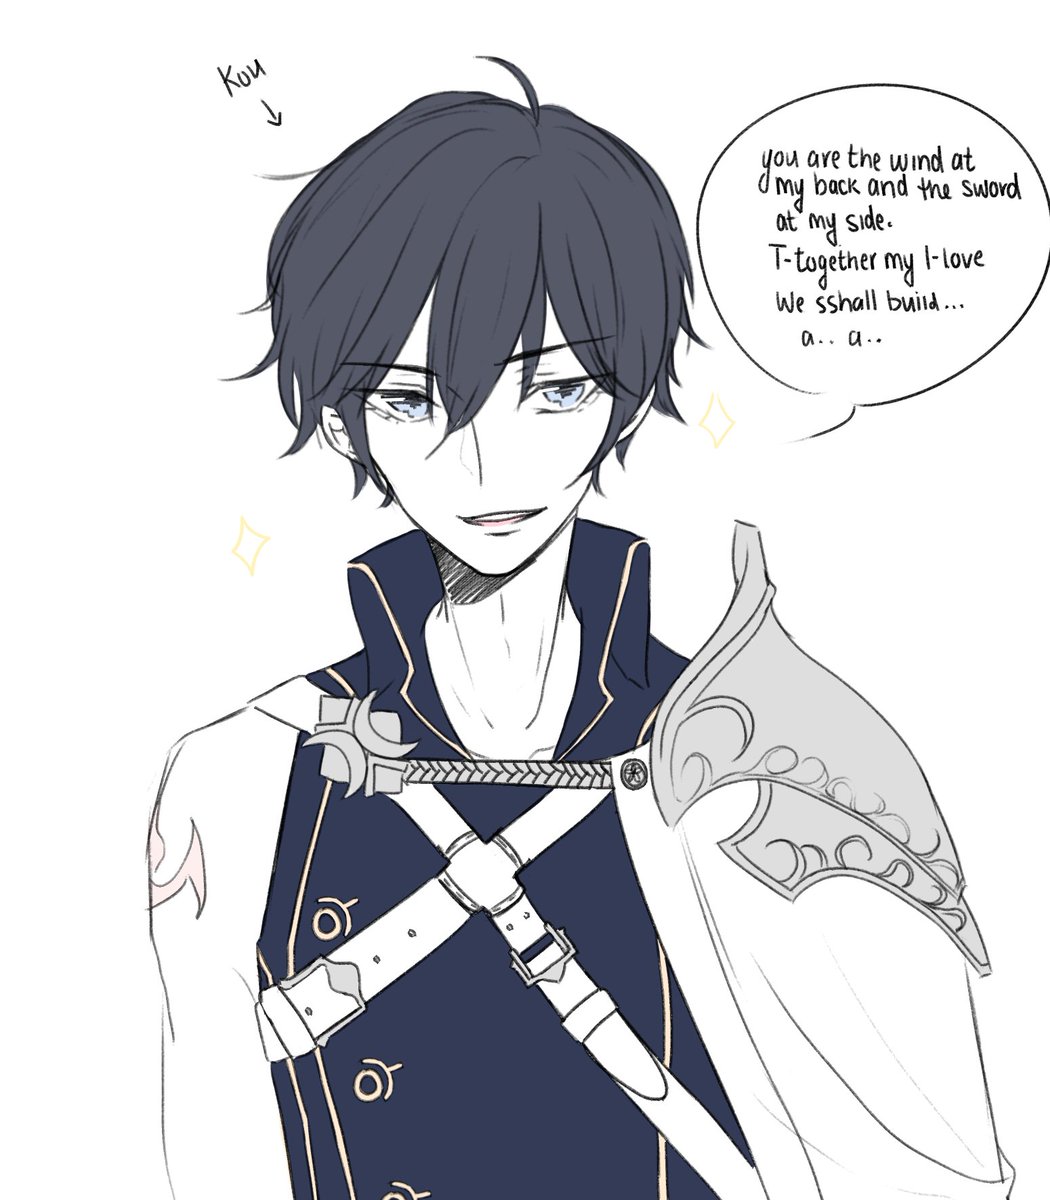 This was supposed to be for OC October but i couldn't not draw it now. Poor Kou can't say Chroms cheesy ass lines LOLLL 